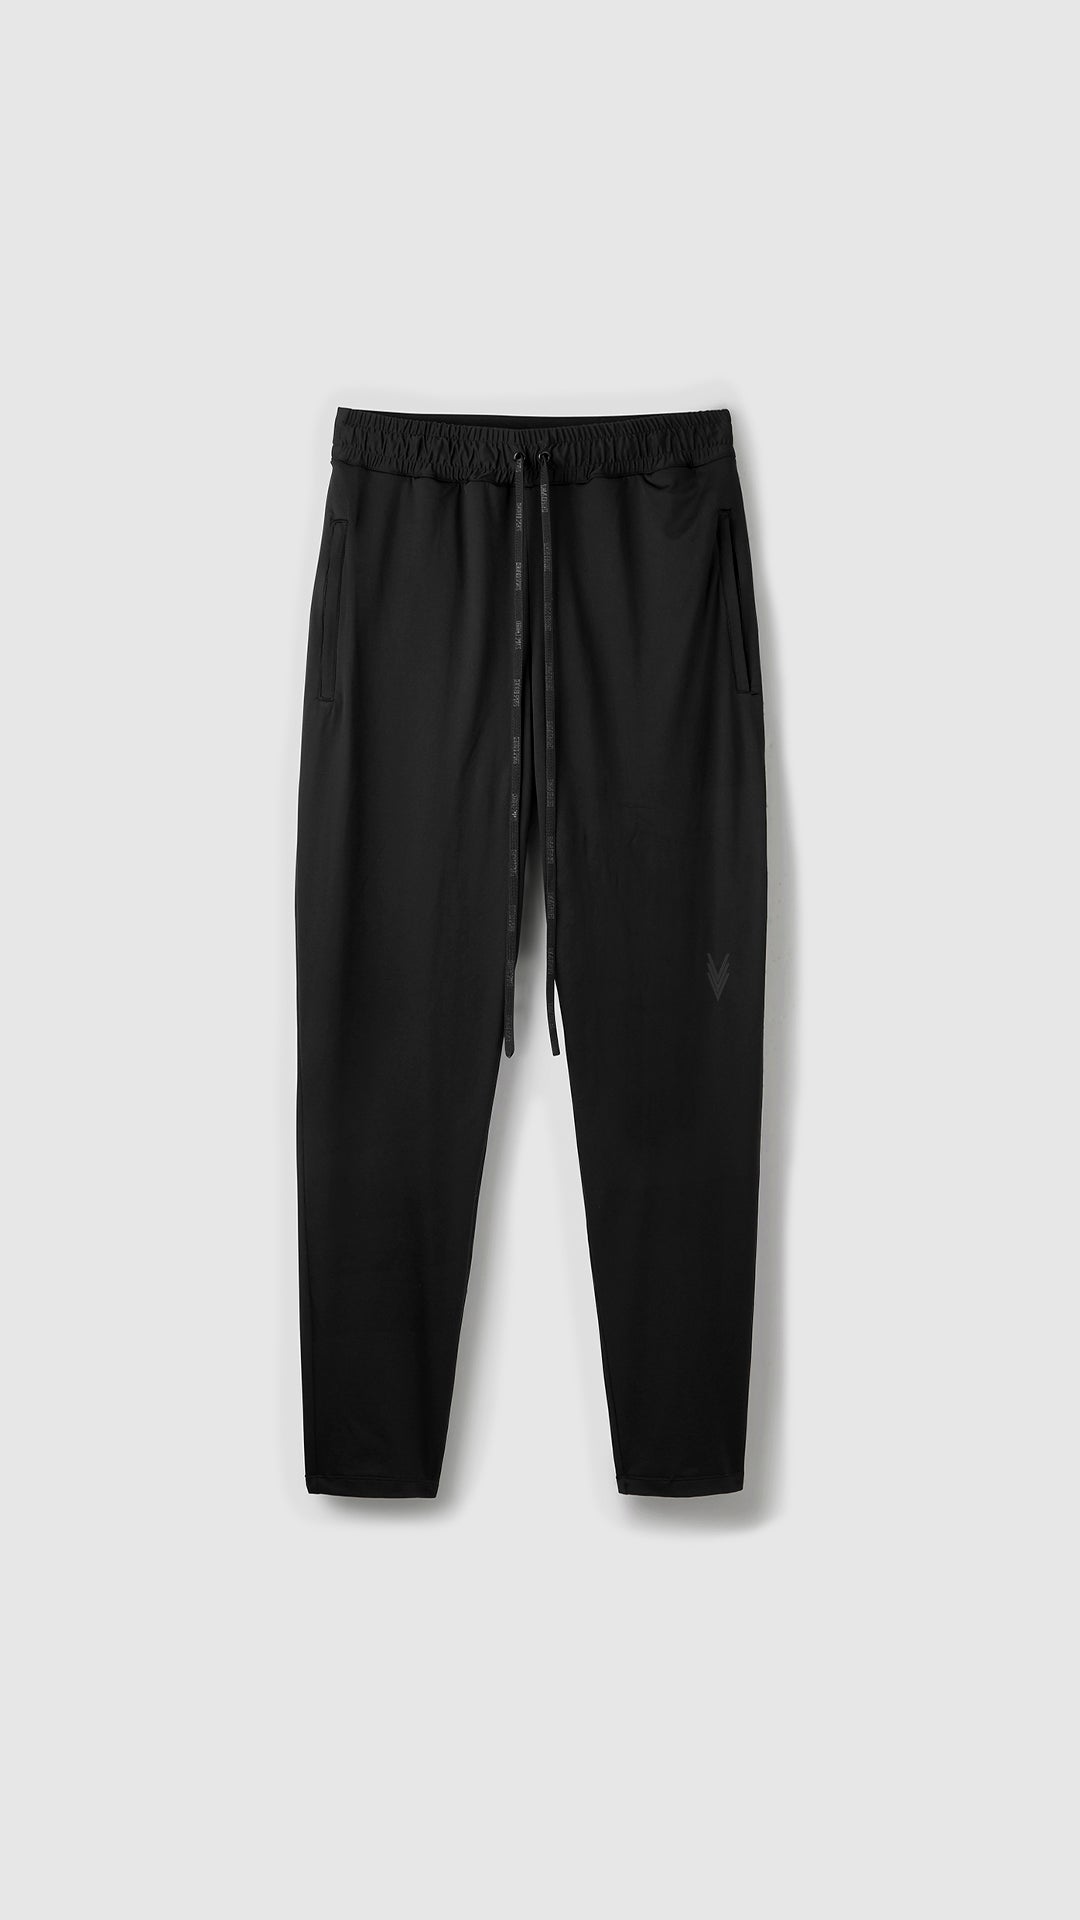 THE TRACK PANTS